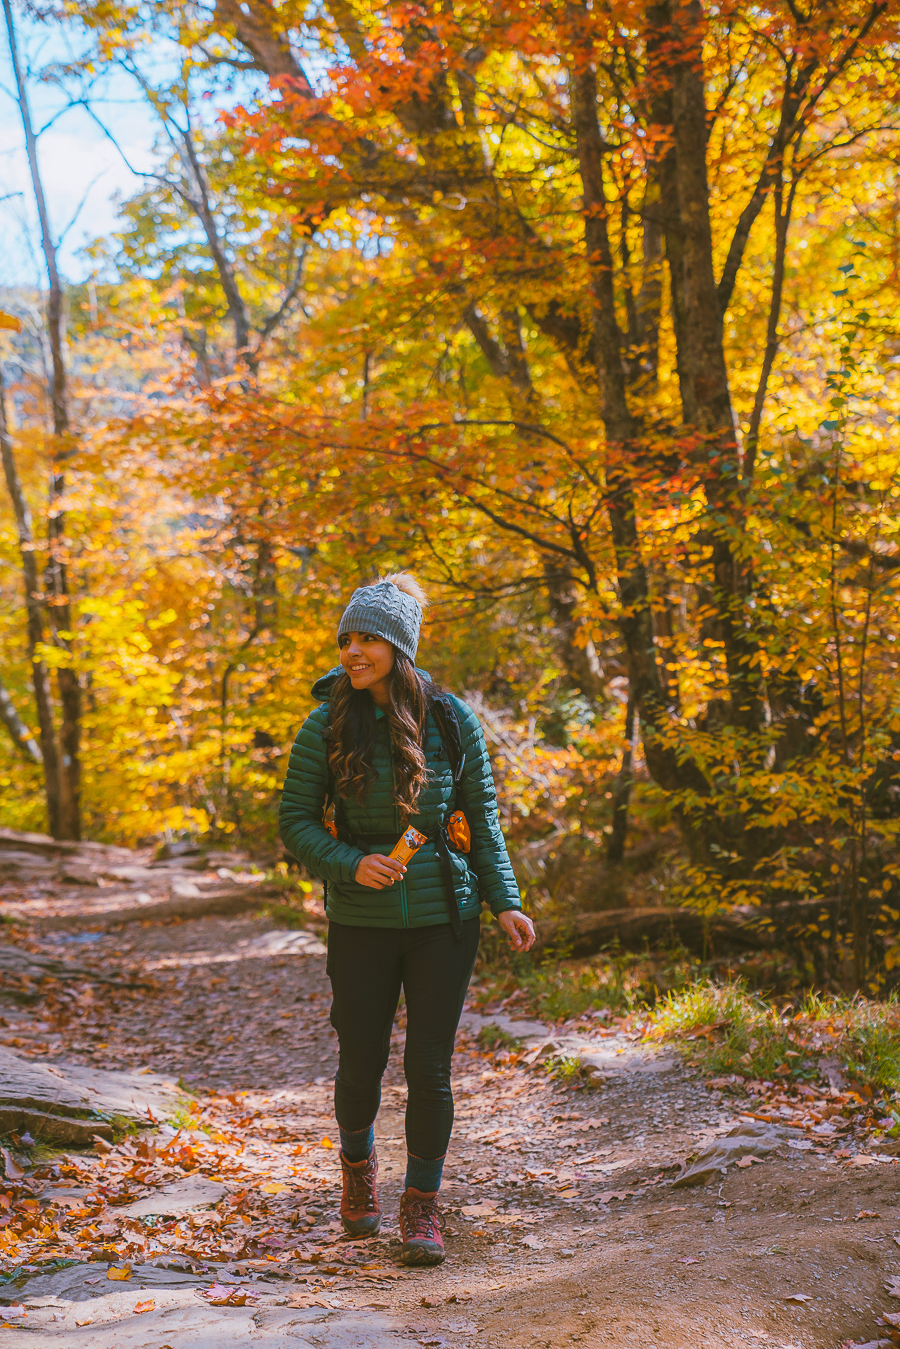 Hiking essentials – How to dress when hiking